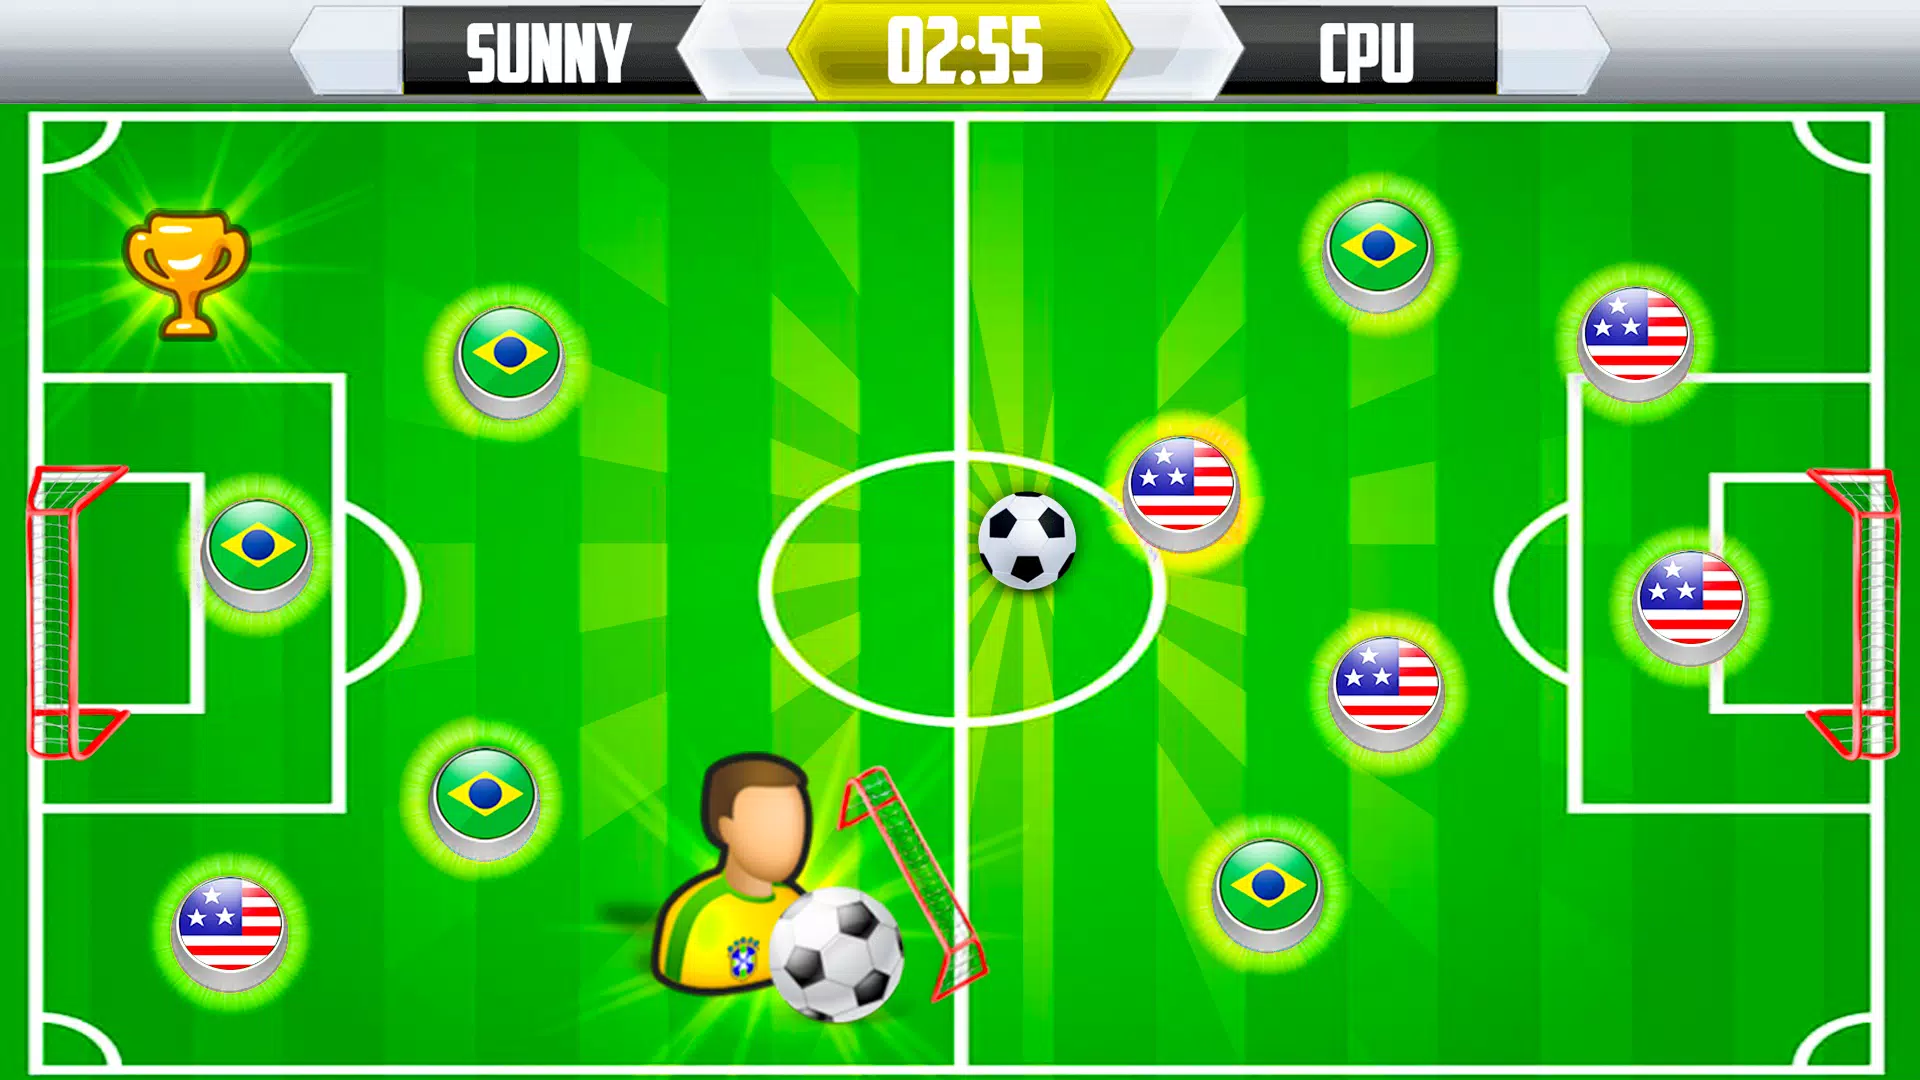 Brasil Play Stars APK for Android Download